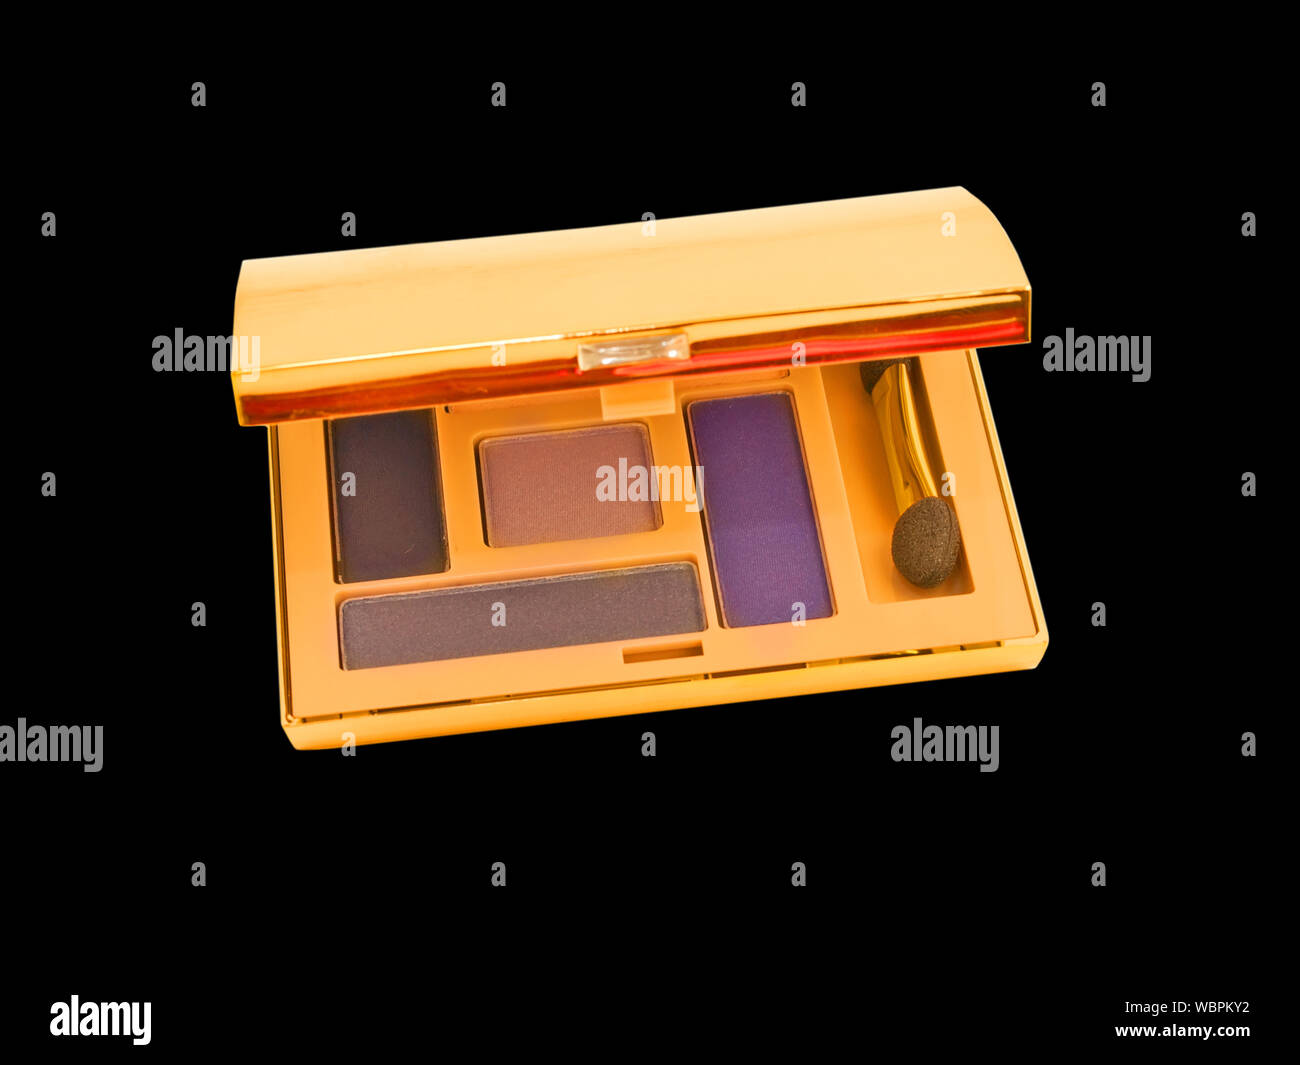 High Angle View Of Eyeshadow Against Black Background Stock Photo